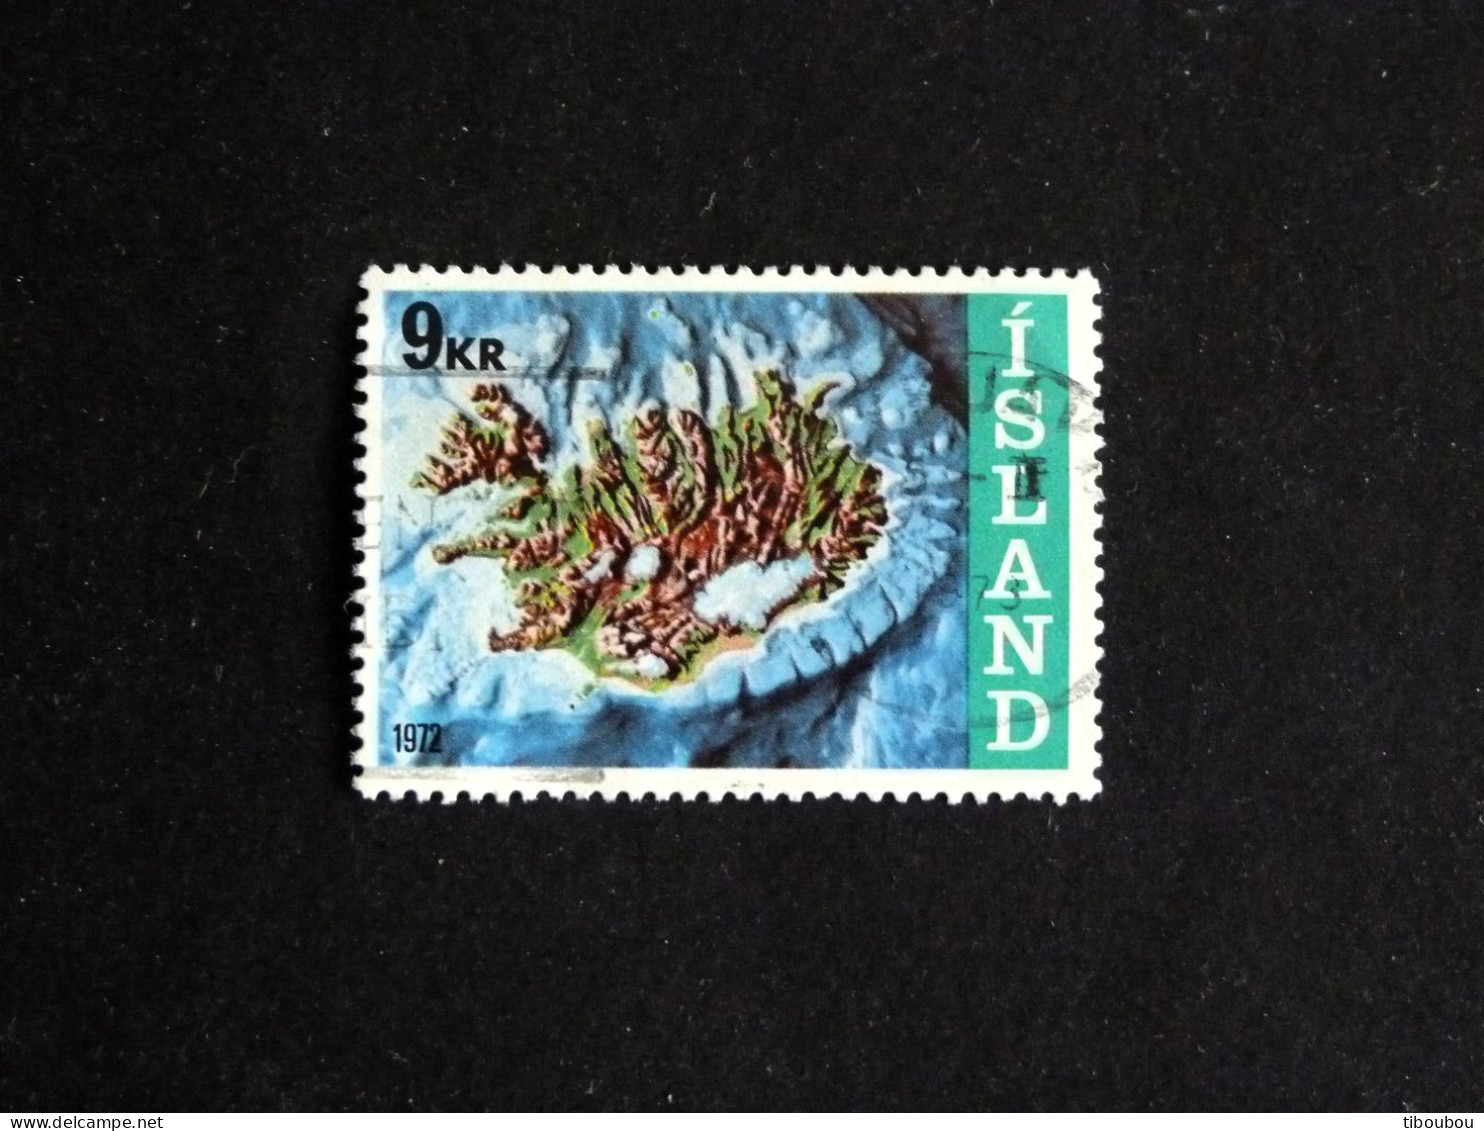 ISLANDE ISLAND ICELAND YT 421 OBLITERE - LE SOCLE CONTINENTAL - Gebraucht